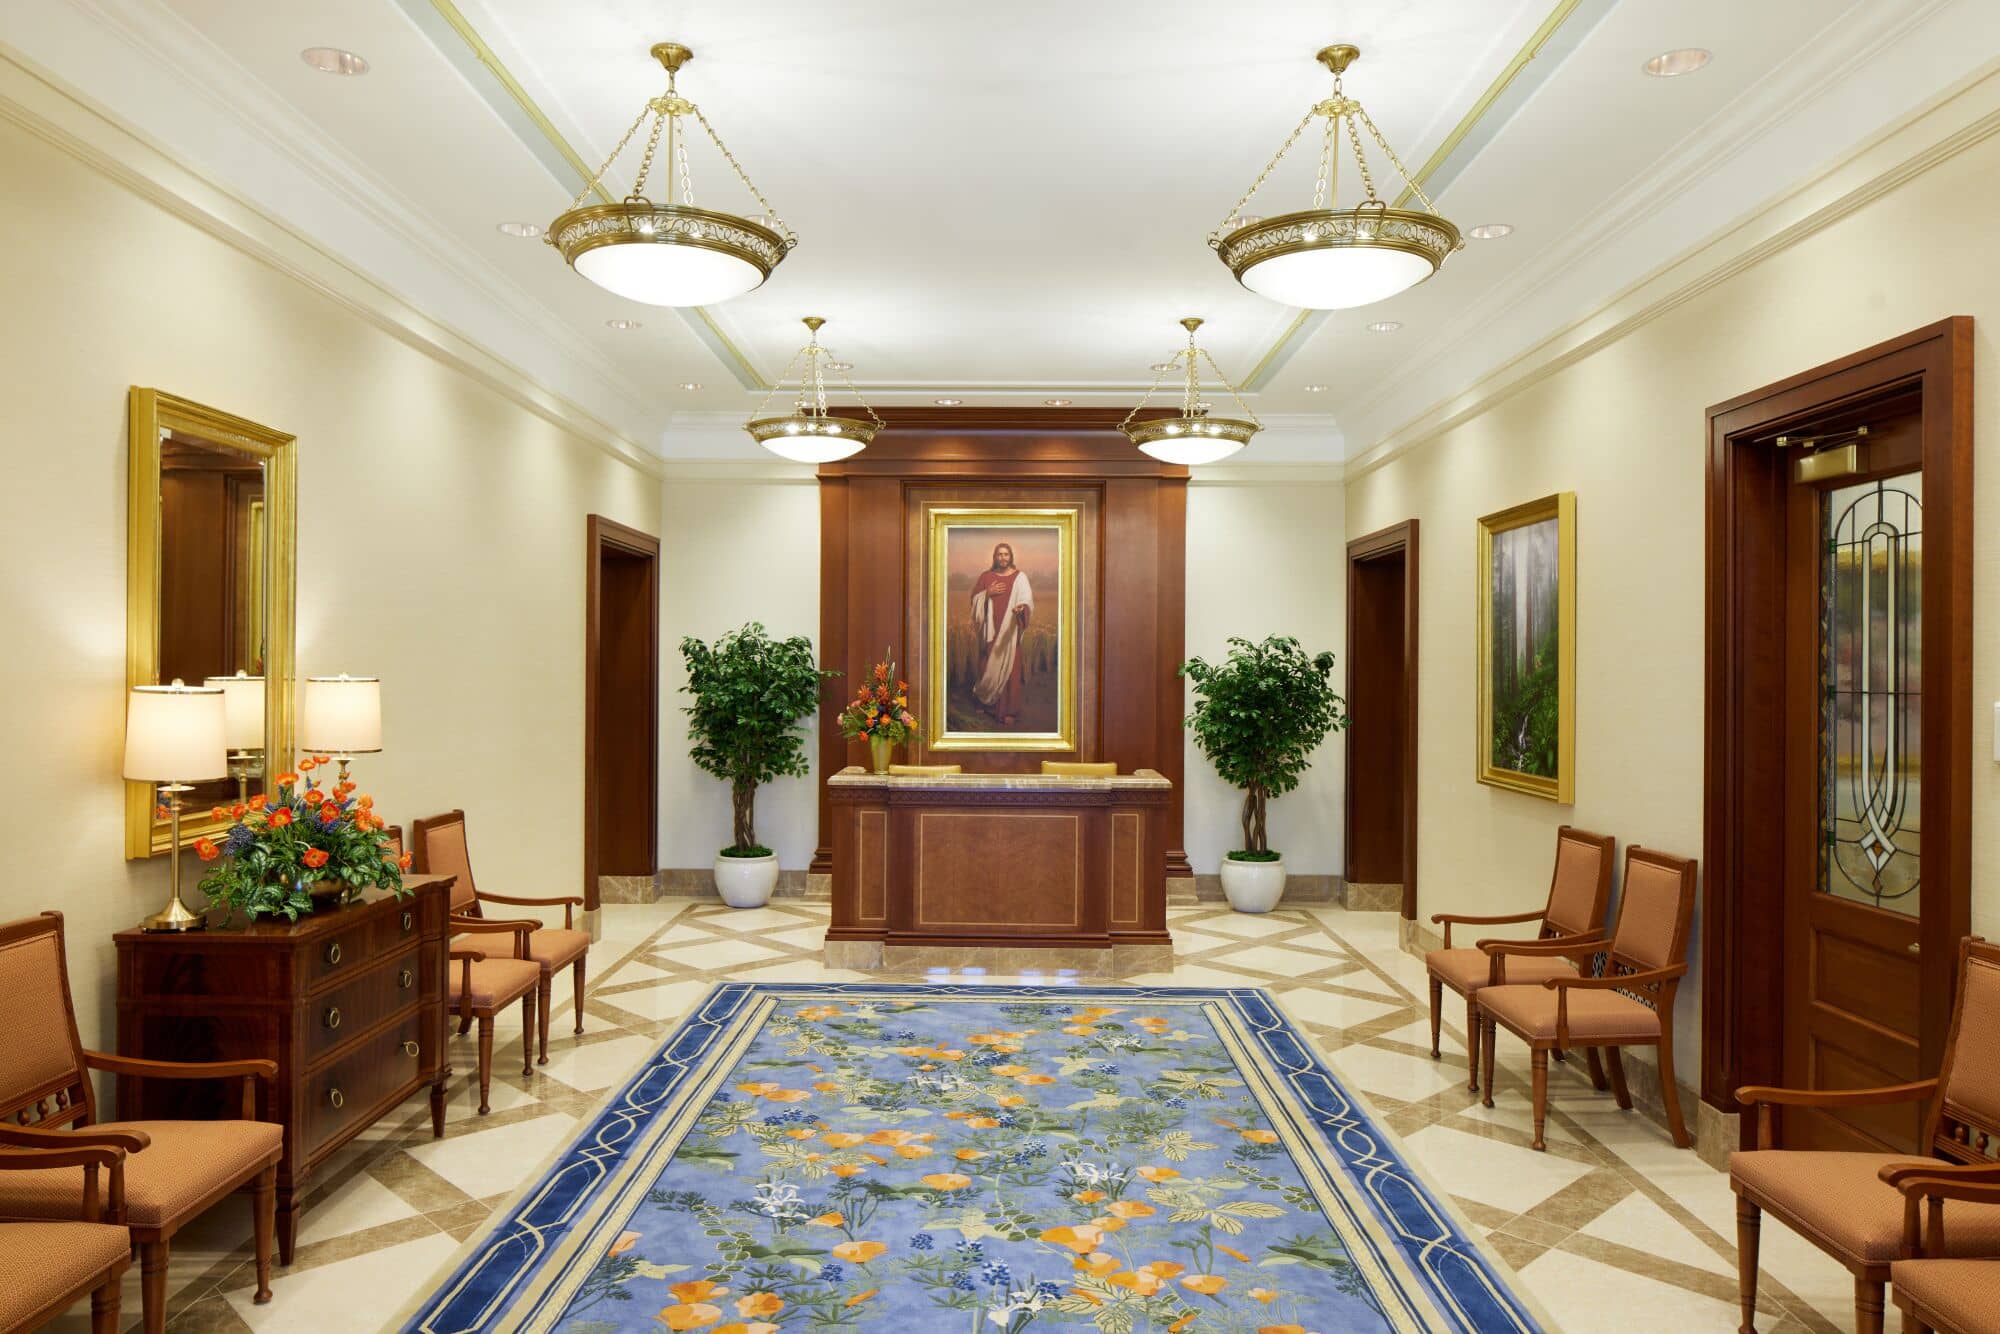 A blue rug on the floor and a front desk in the Feather River temple, with a painting of the Savior behind the desk.